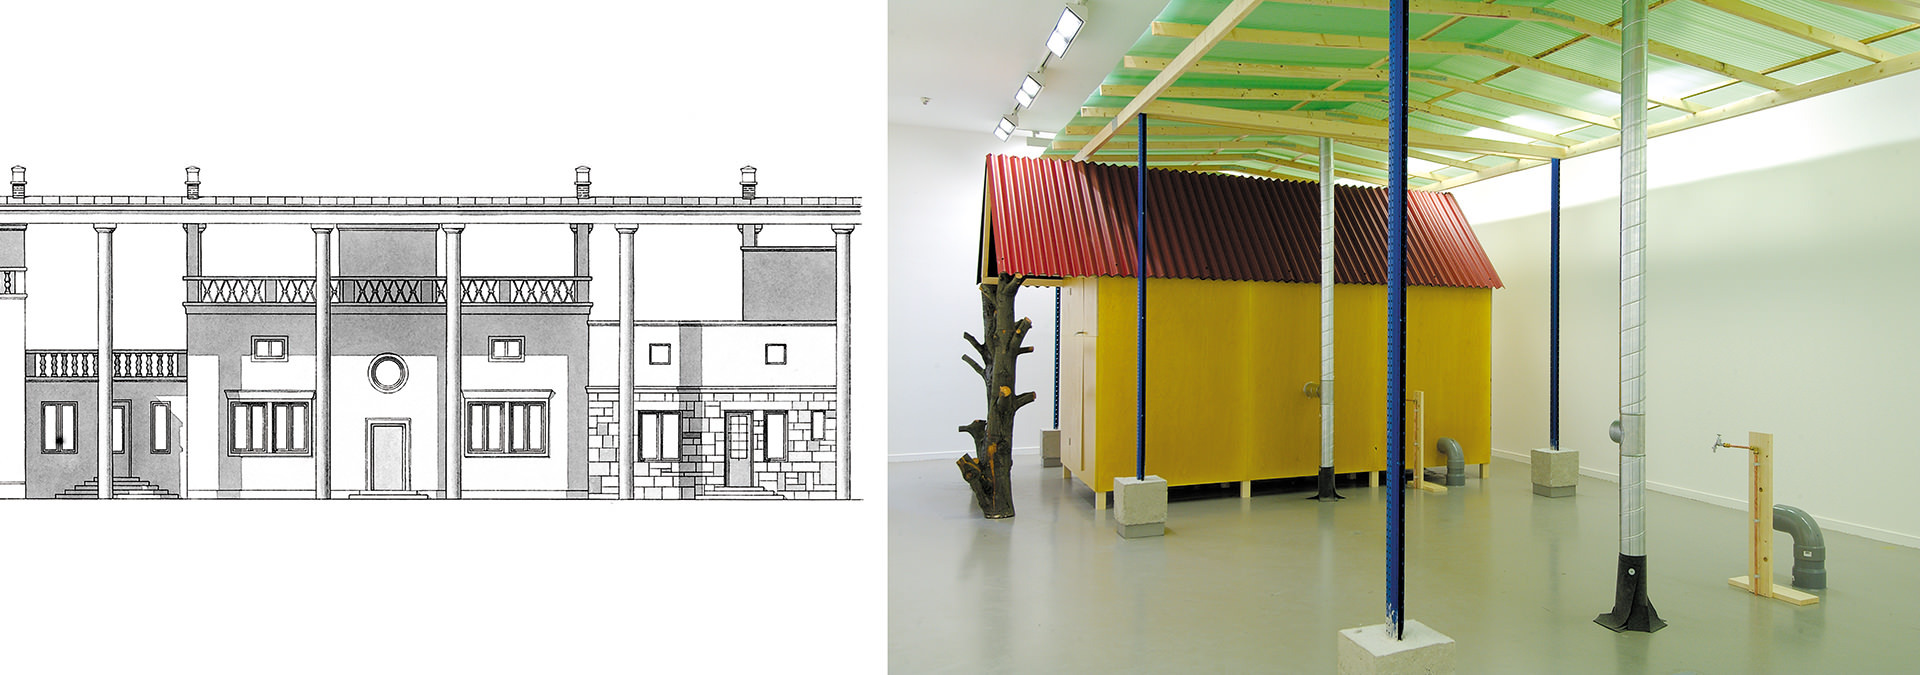 &ldquo;Ljubljana under a Common Roof&rdquo; was a case study based on the Ple?nik model. De Appel Foundation for Contemporary Art, Amsterdam, 2004. (Images courtesy the artist)